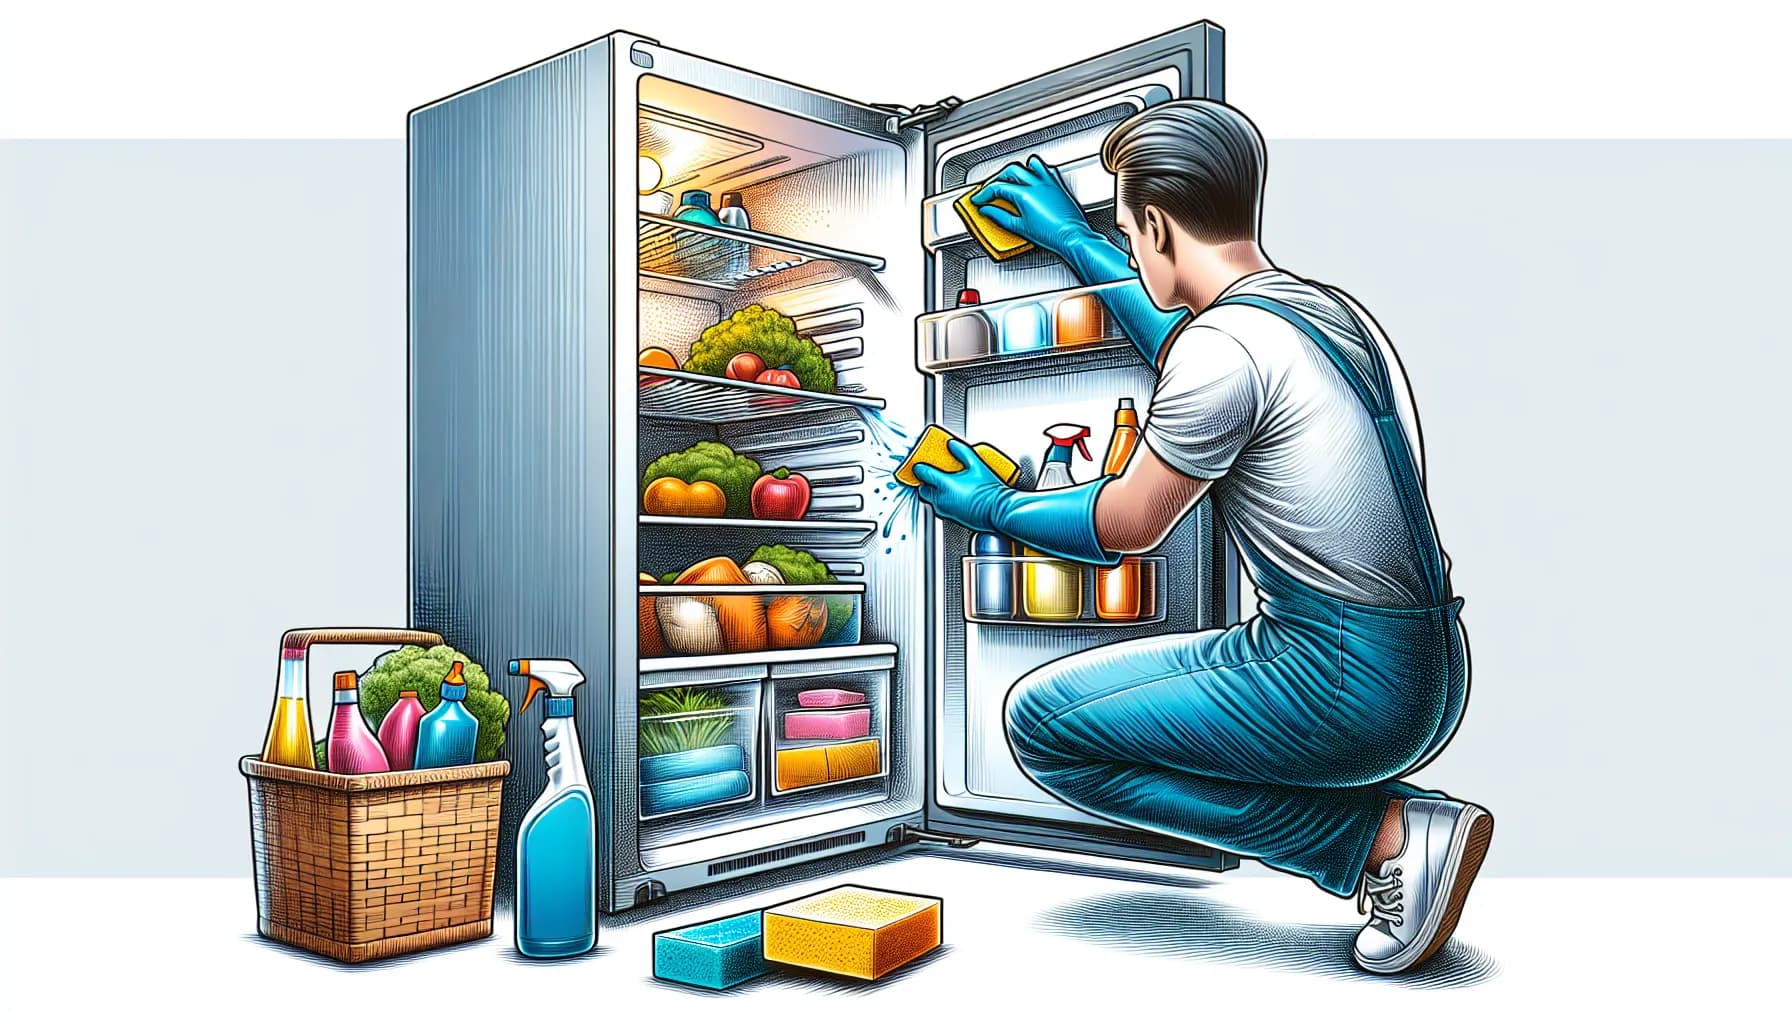 Person in gloves deep cleaning refrigerator and freezer with sponge and cleaner, demonstrating safe techniques.